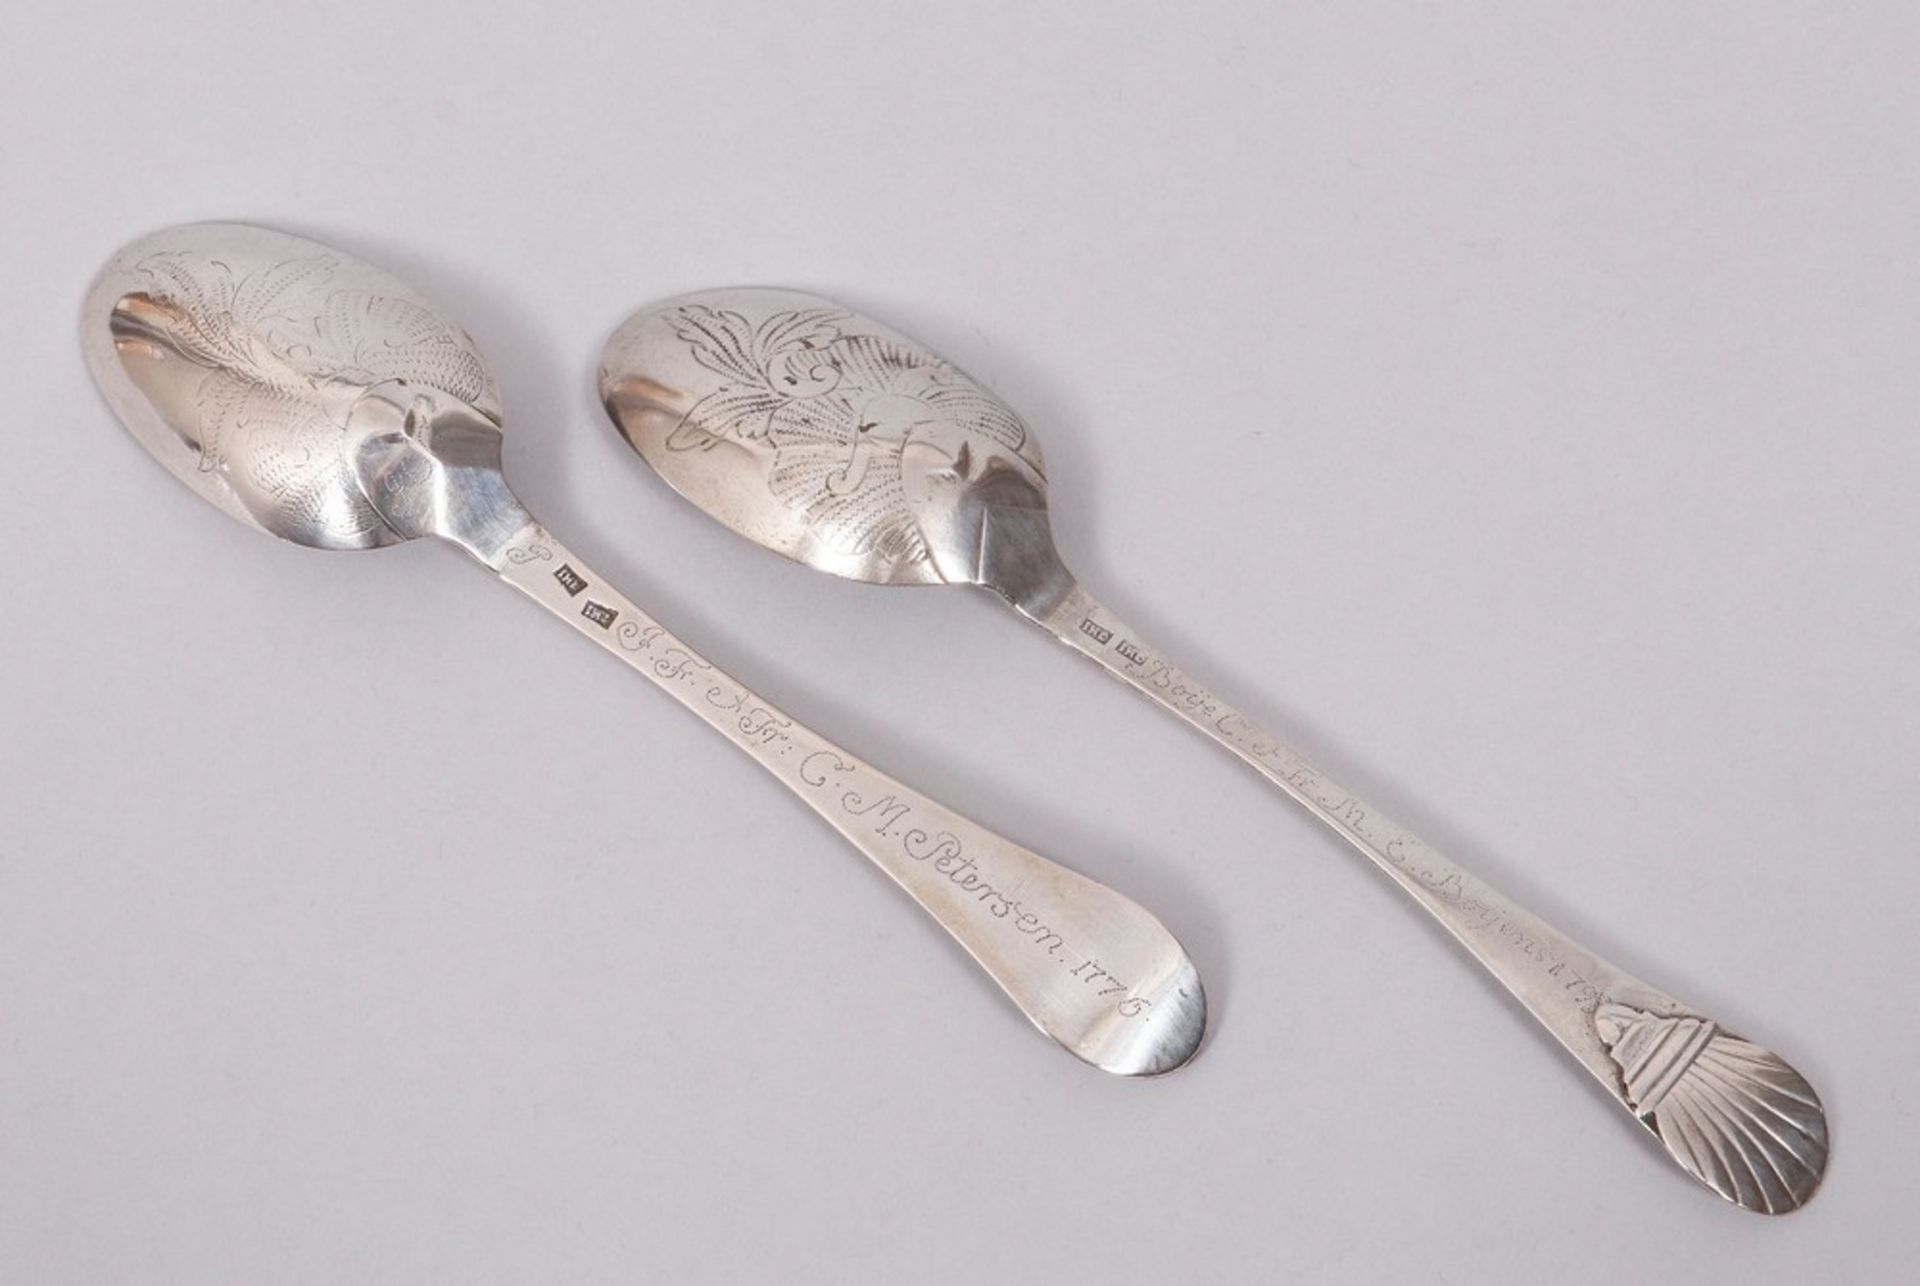 2 Baroque dining spoons, silver, probably North German, 18th C. - Image 2 of 9